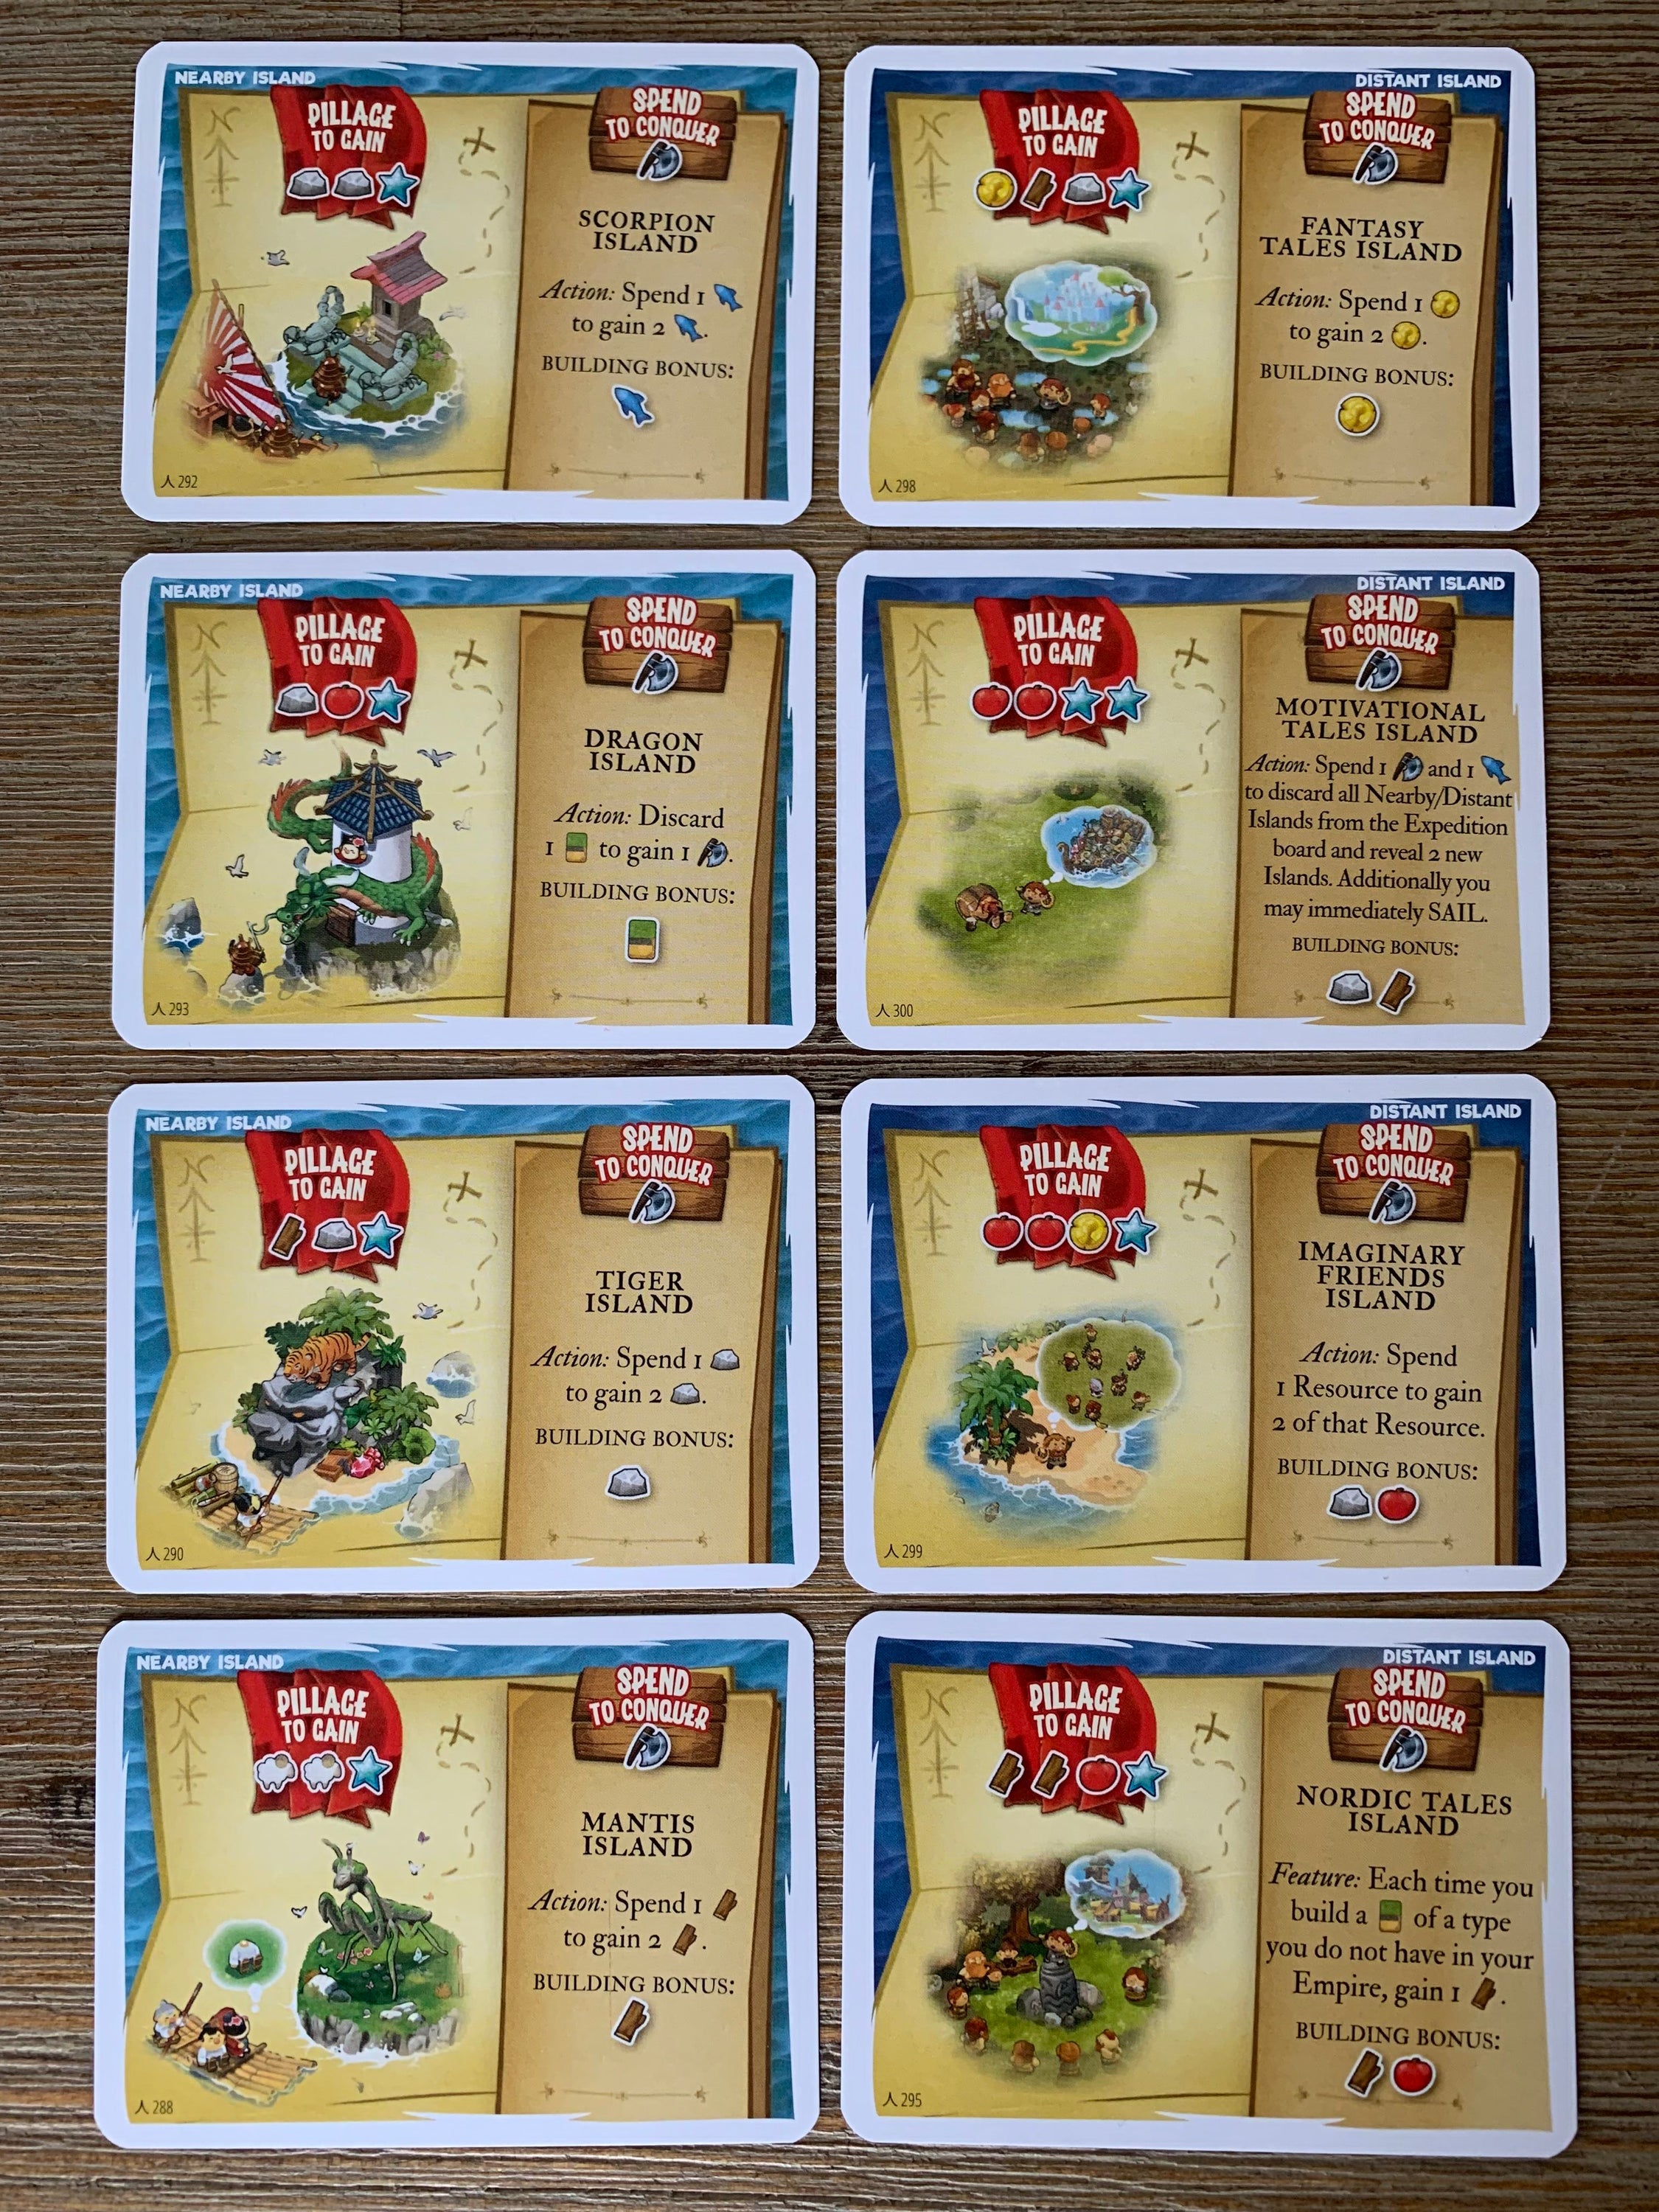 Imperial Settlers: Empires of the North: Japanese Islands (Expansion)